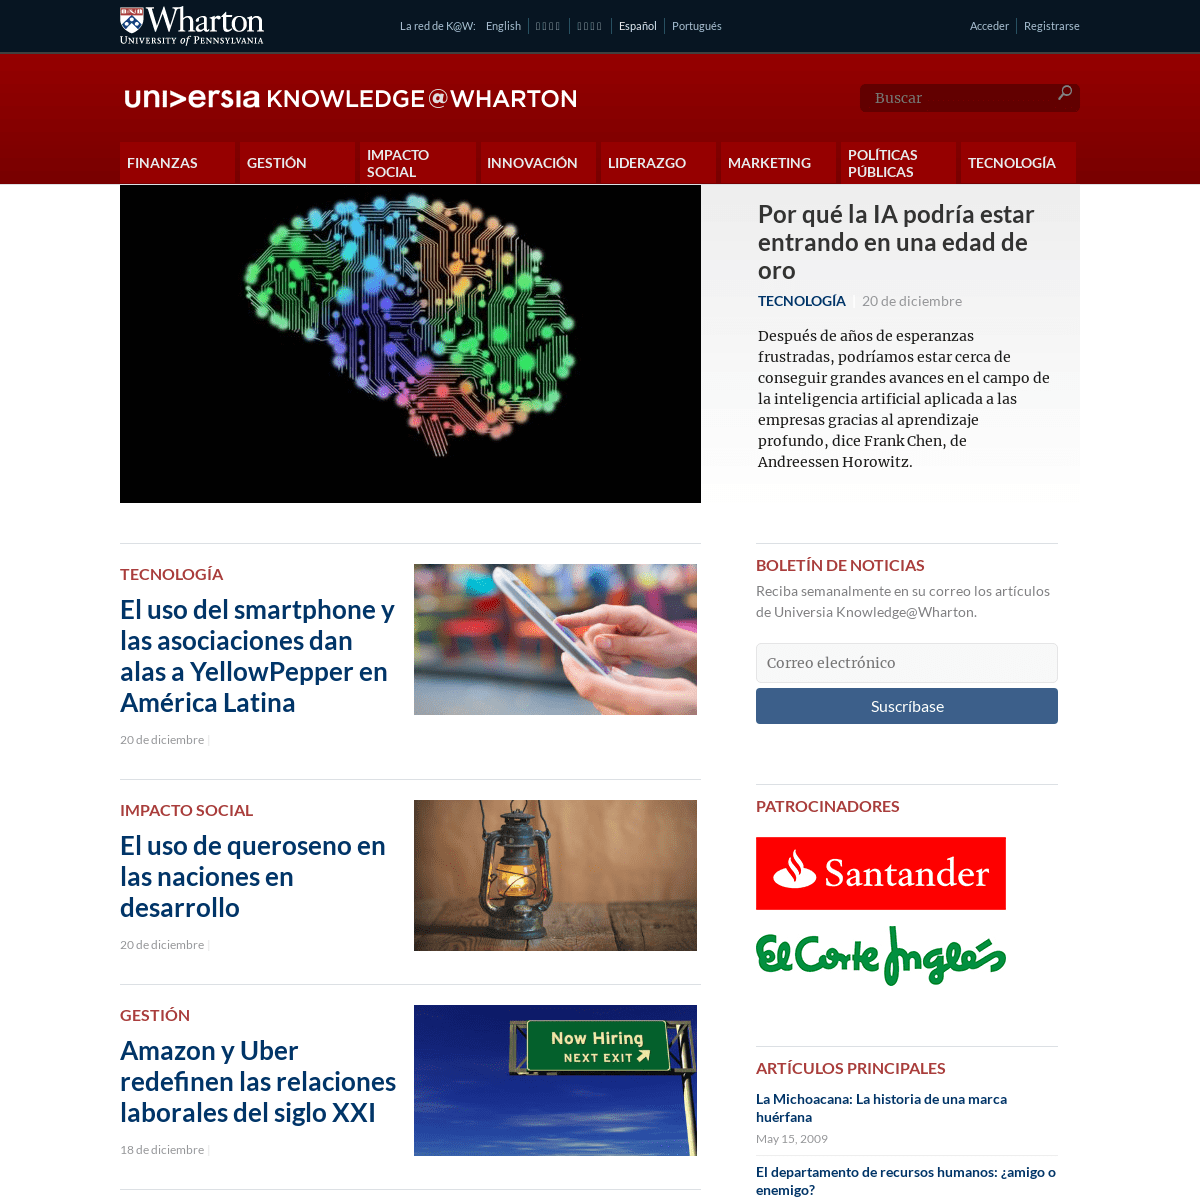 A complete backup of knowledgeatwharton.com.es